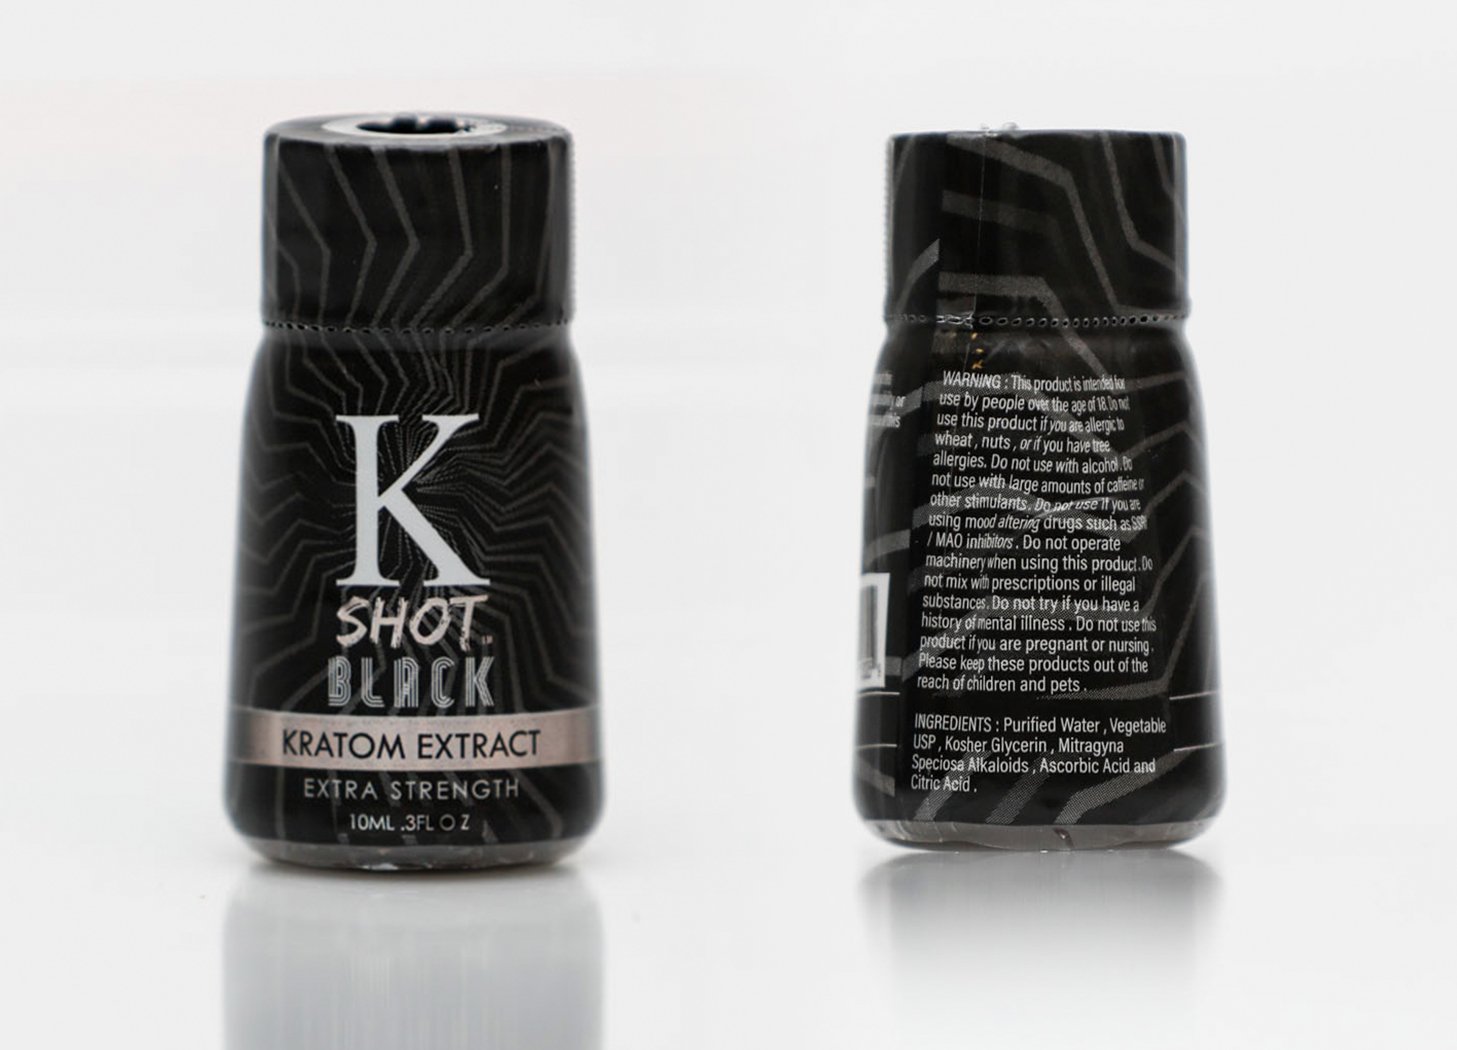 The K Shot Black extract warns customers not to combine it with
                                    certain substances, including alcohol and prescription drugs. The
                                    liquid shot contains 114 milligrams of mitragynine and 24 milligrams
                                    of speciociliatine, but neither amount is listed on the bottle.